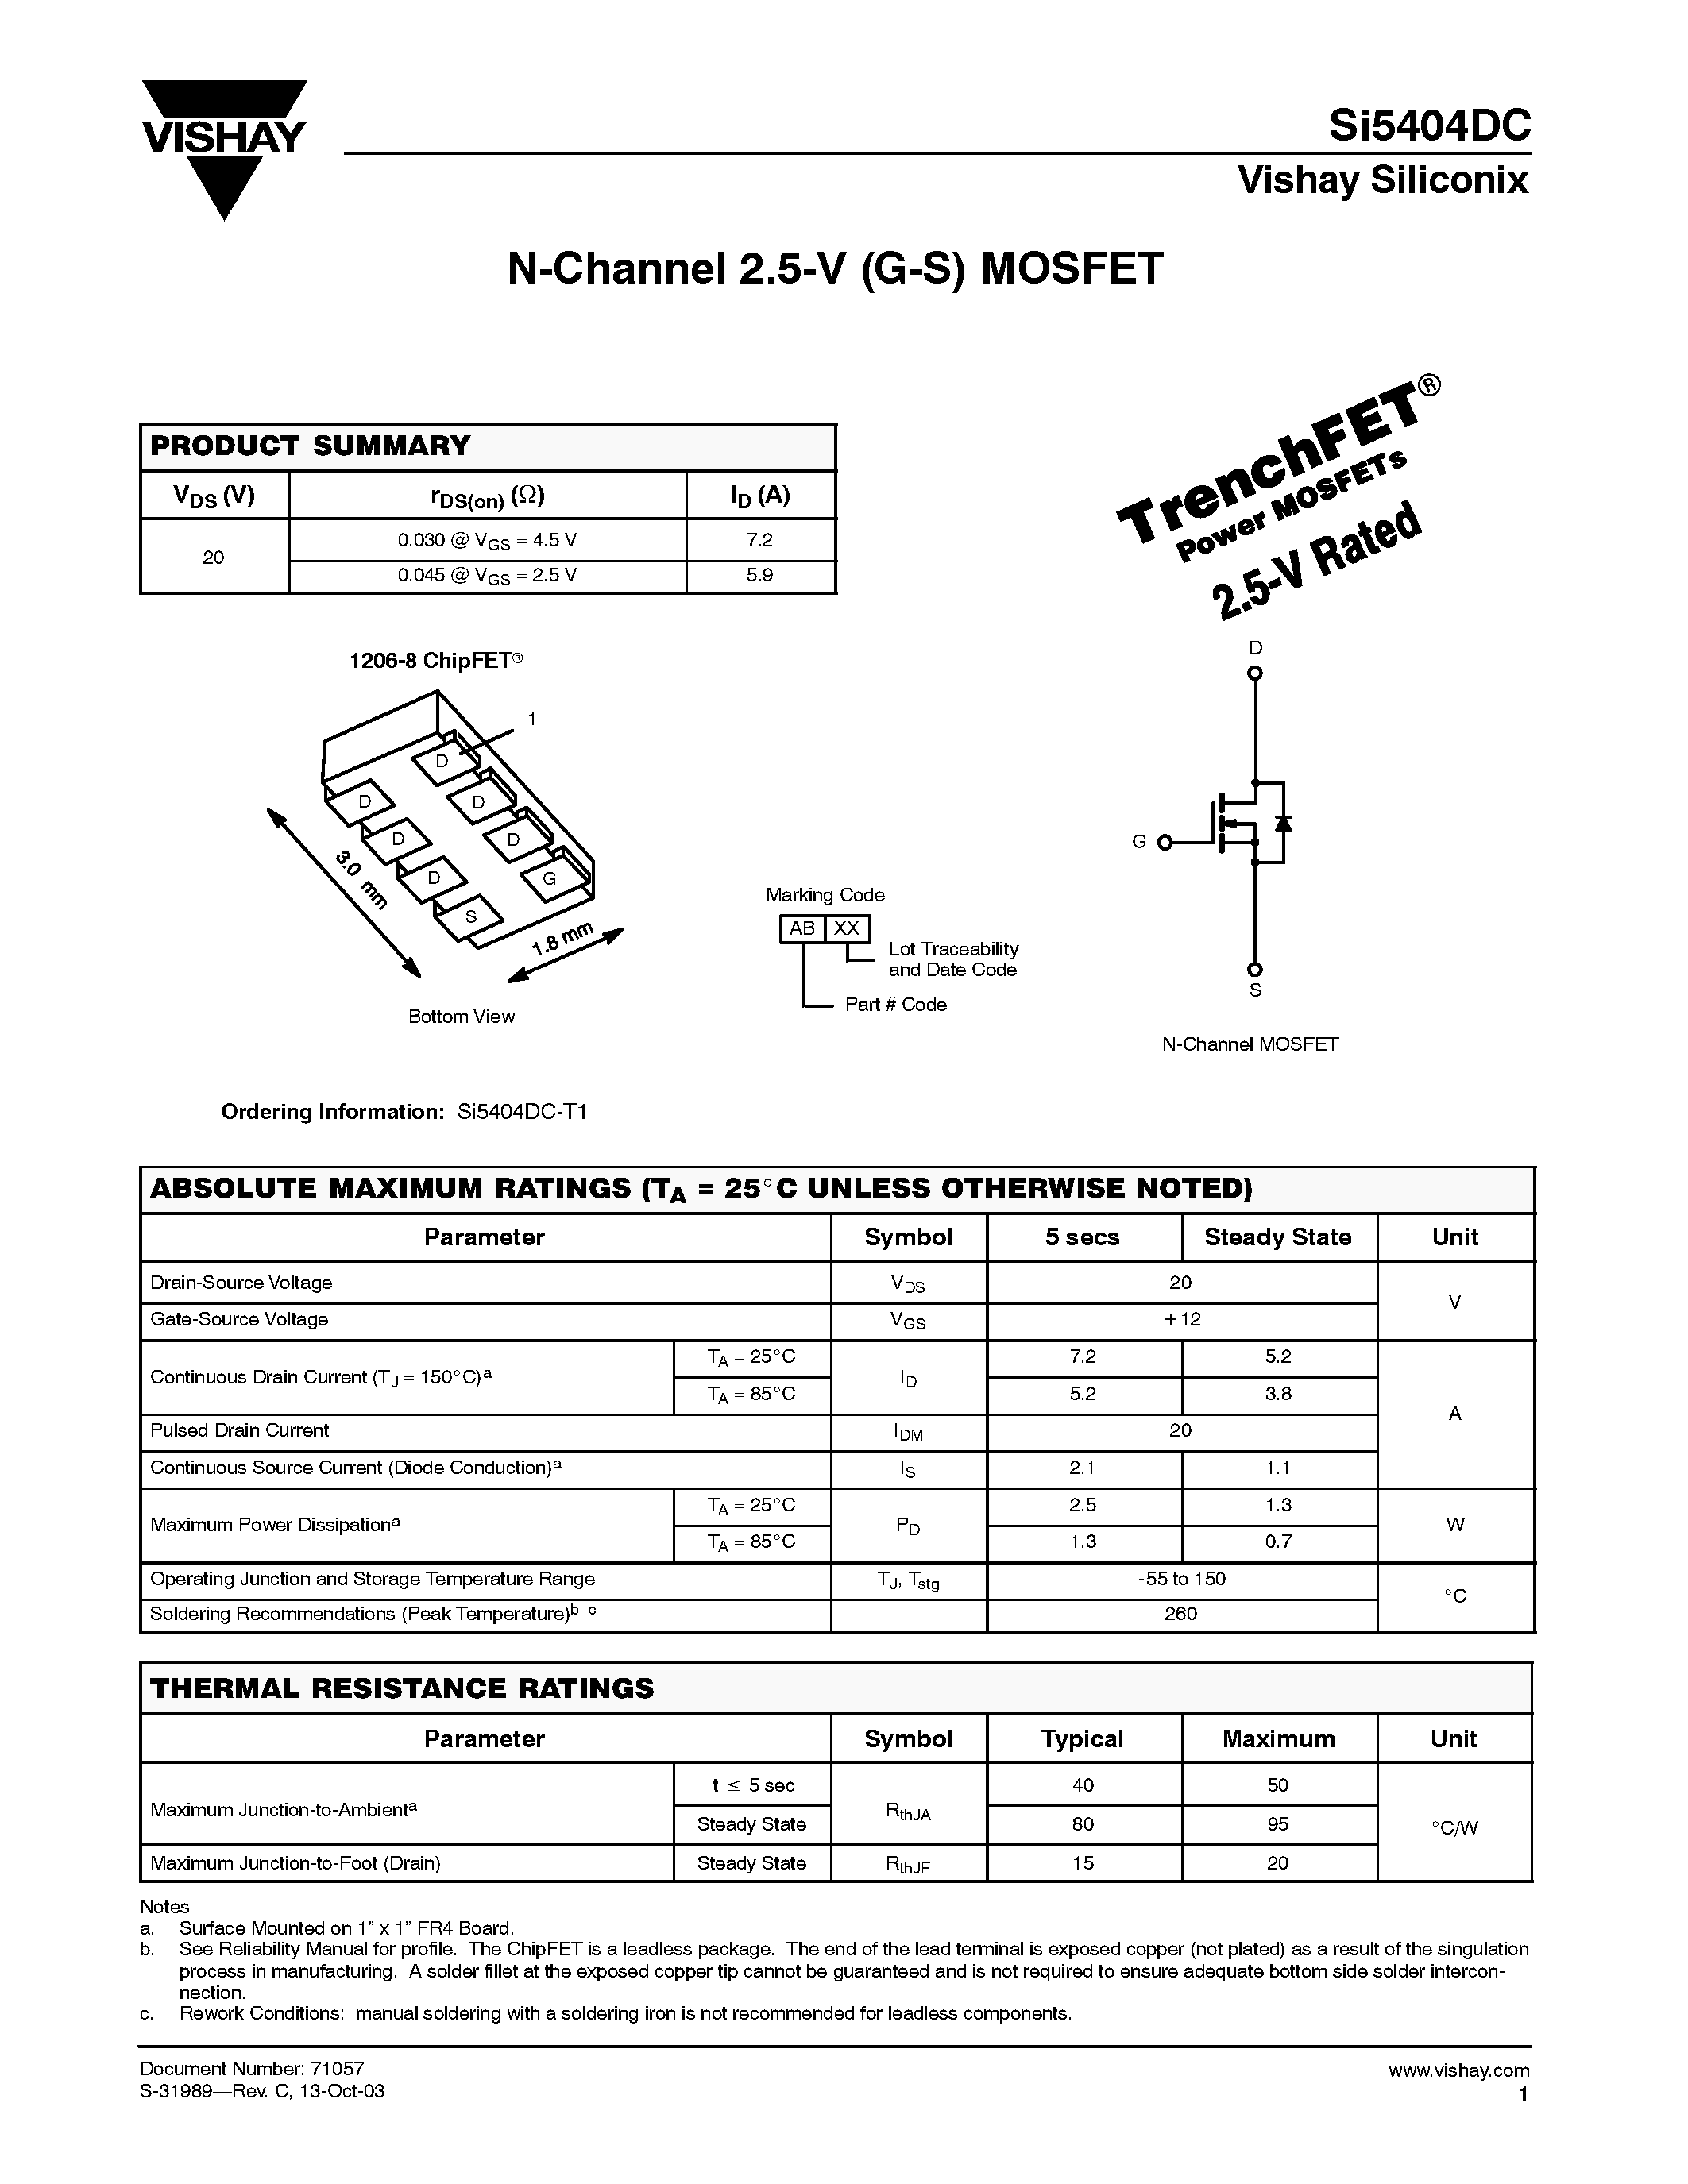 Datasheet SI5404DC - N-Channel 2.5-V (G-S) MOSFET page 1